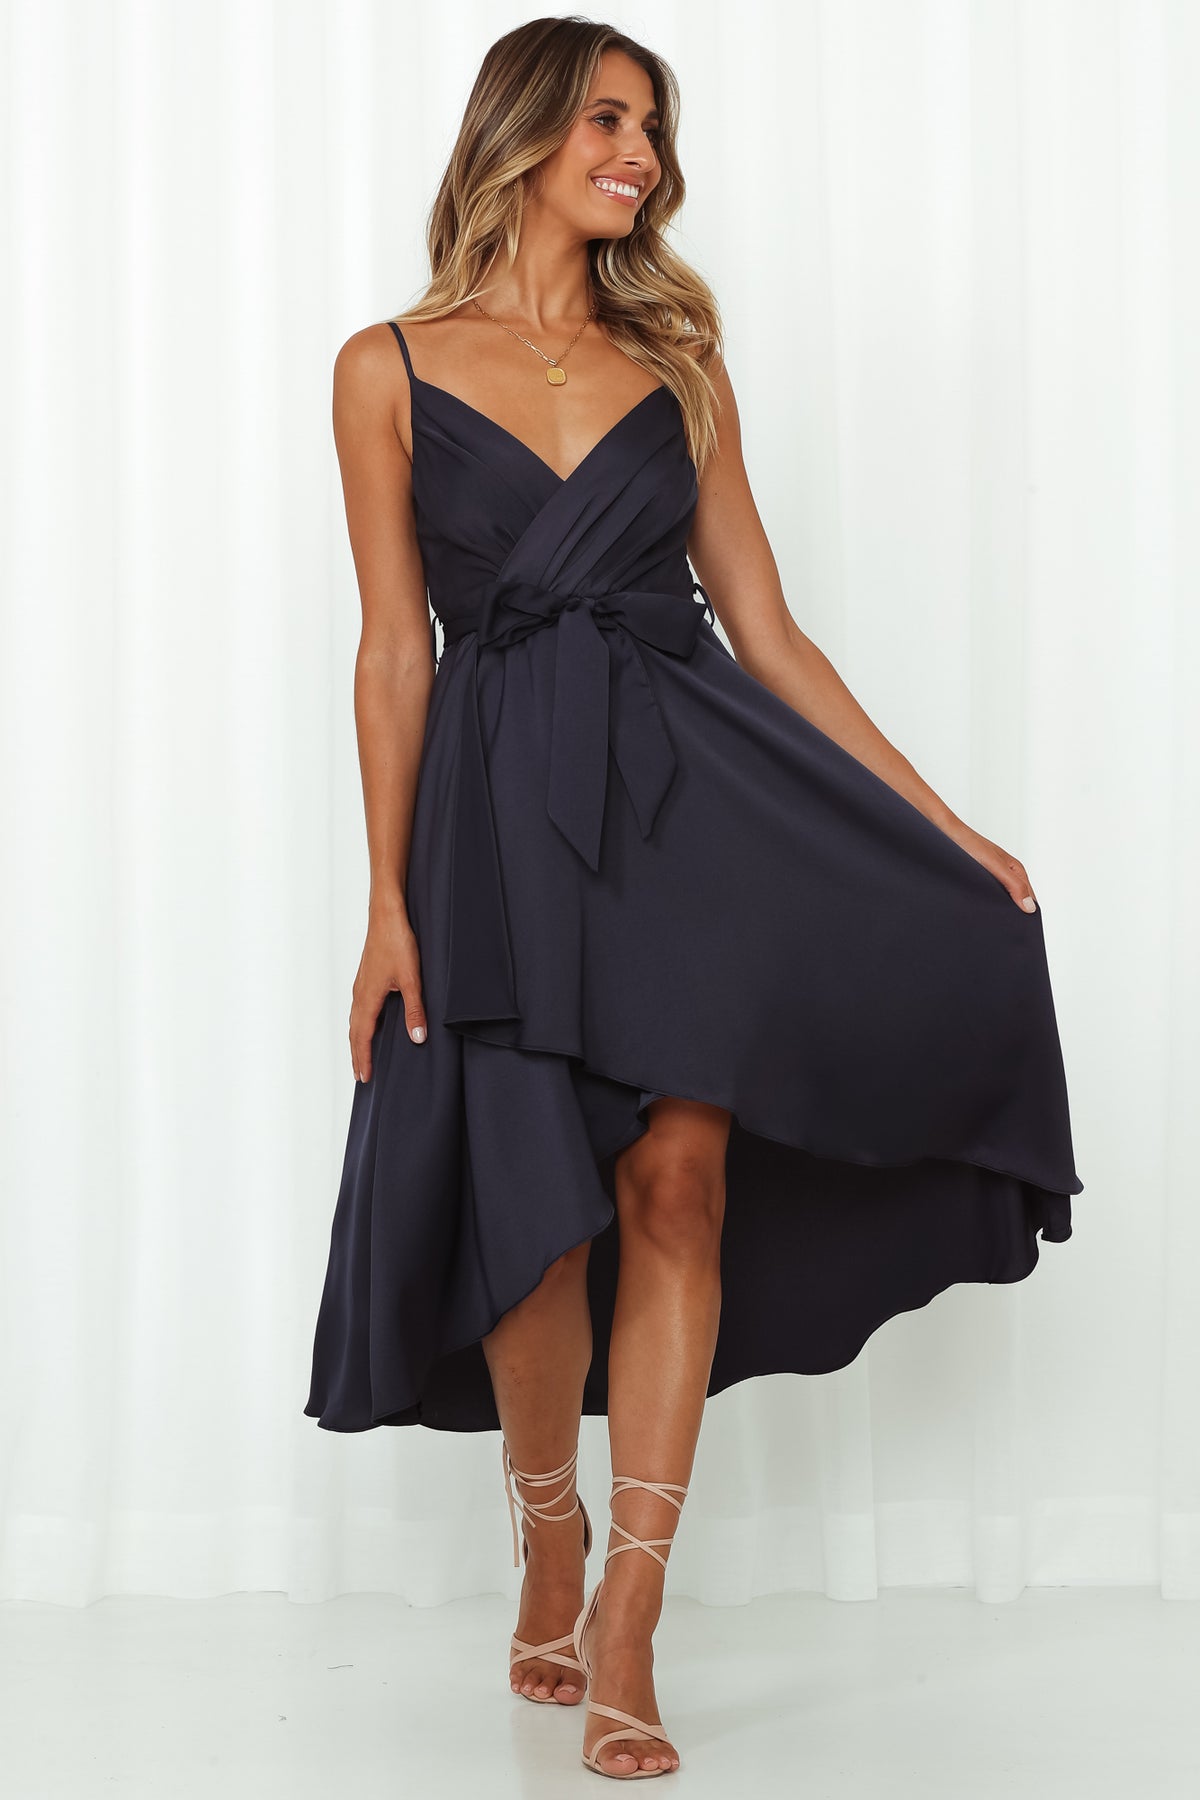 Shop Formal Dress - Fuel To My Fire Midi Dress Navy featured image